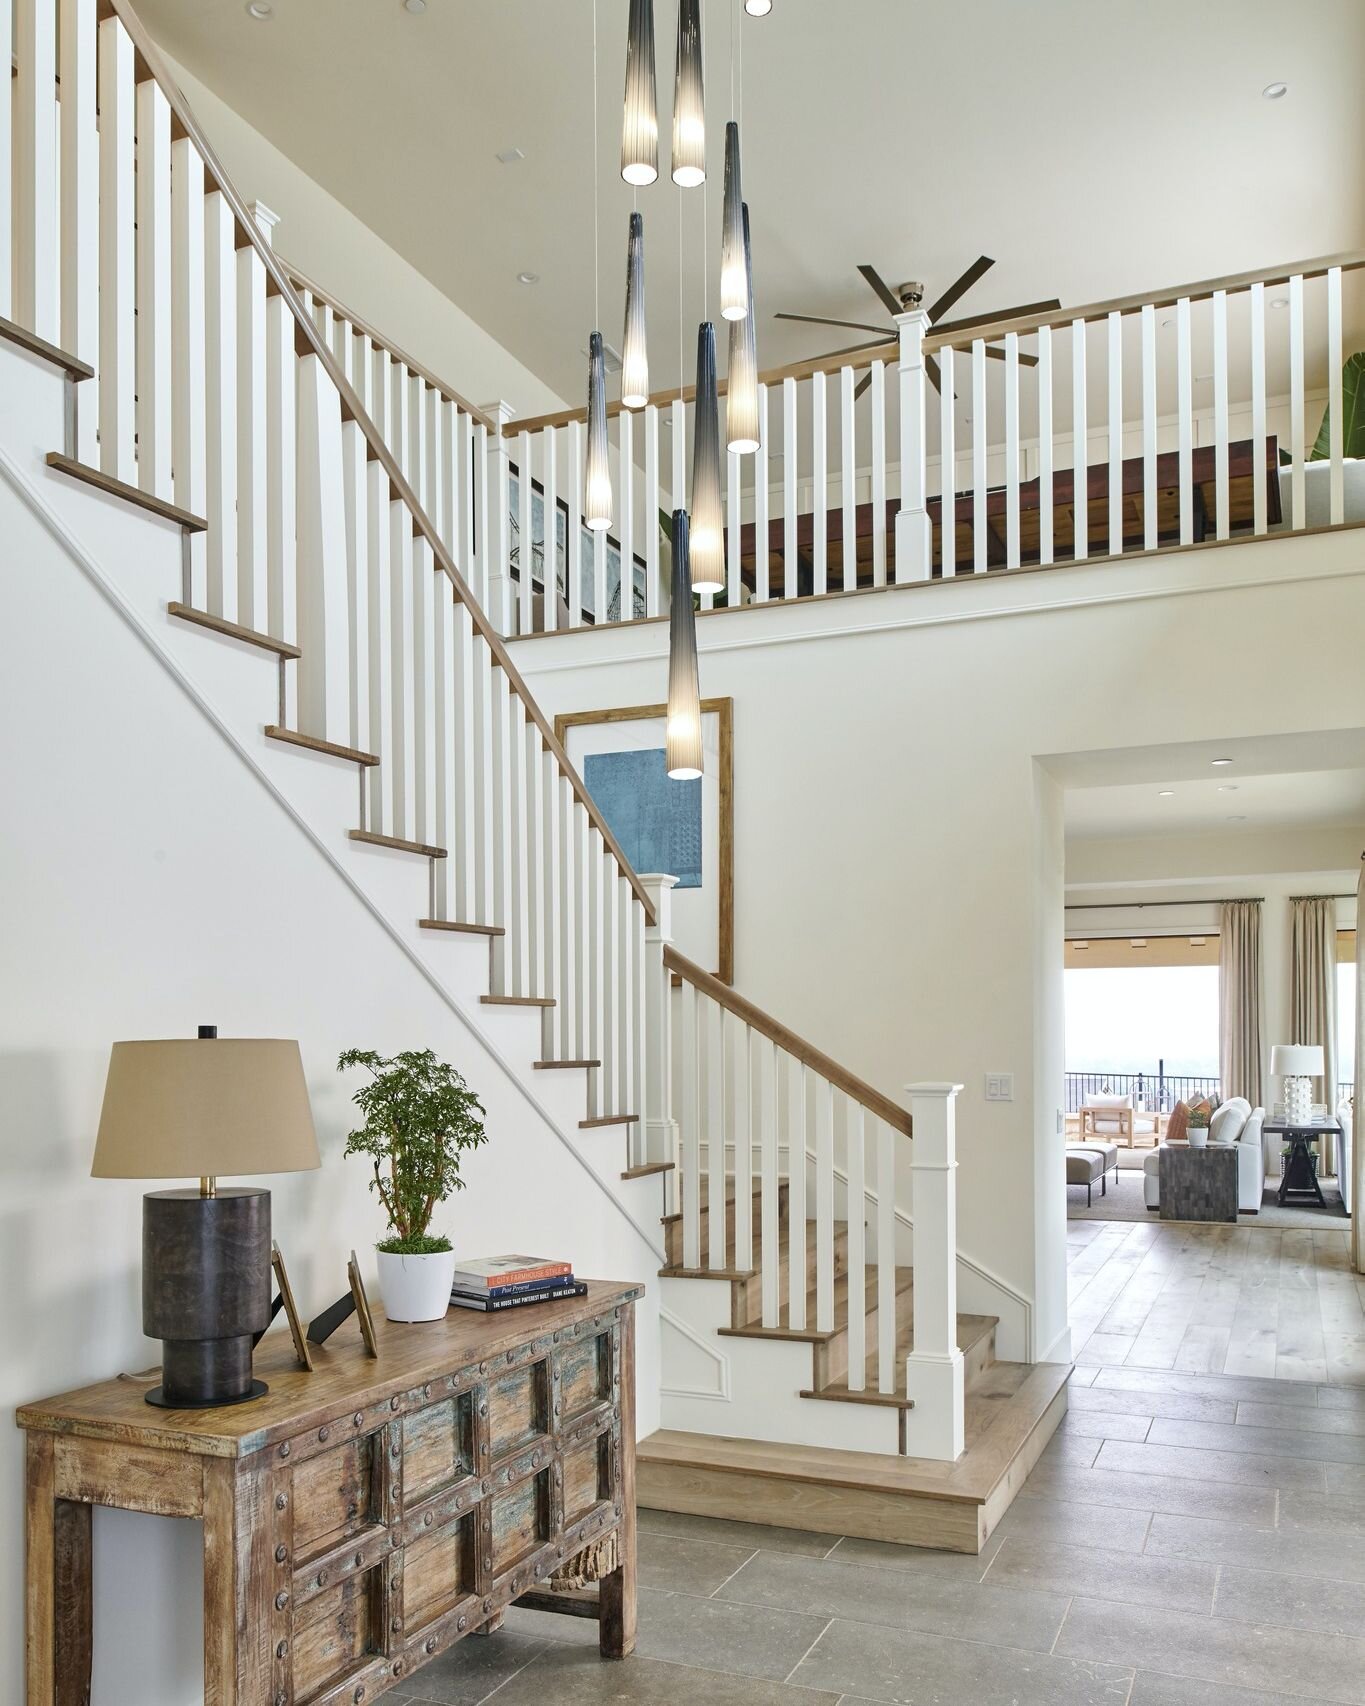 It's Friday Eve, and we're kicking it off with this beautiful stairway. Bright whites and warm wood tones are a timeless way to design your space. 

Luxury Model Home in Rolling Hills, CA 📍
.
.
.
#interiors123 #interiors4all #interiordesign #stairwa